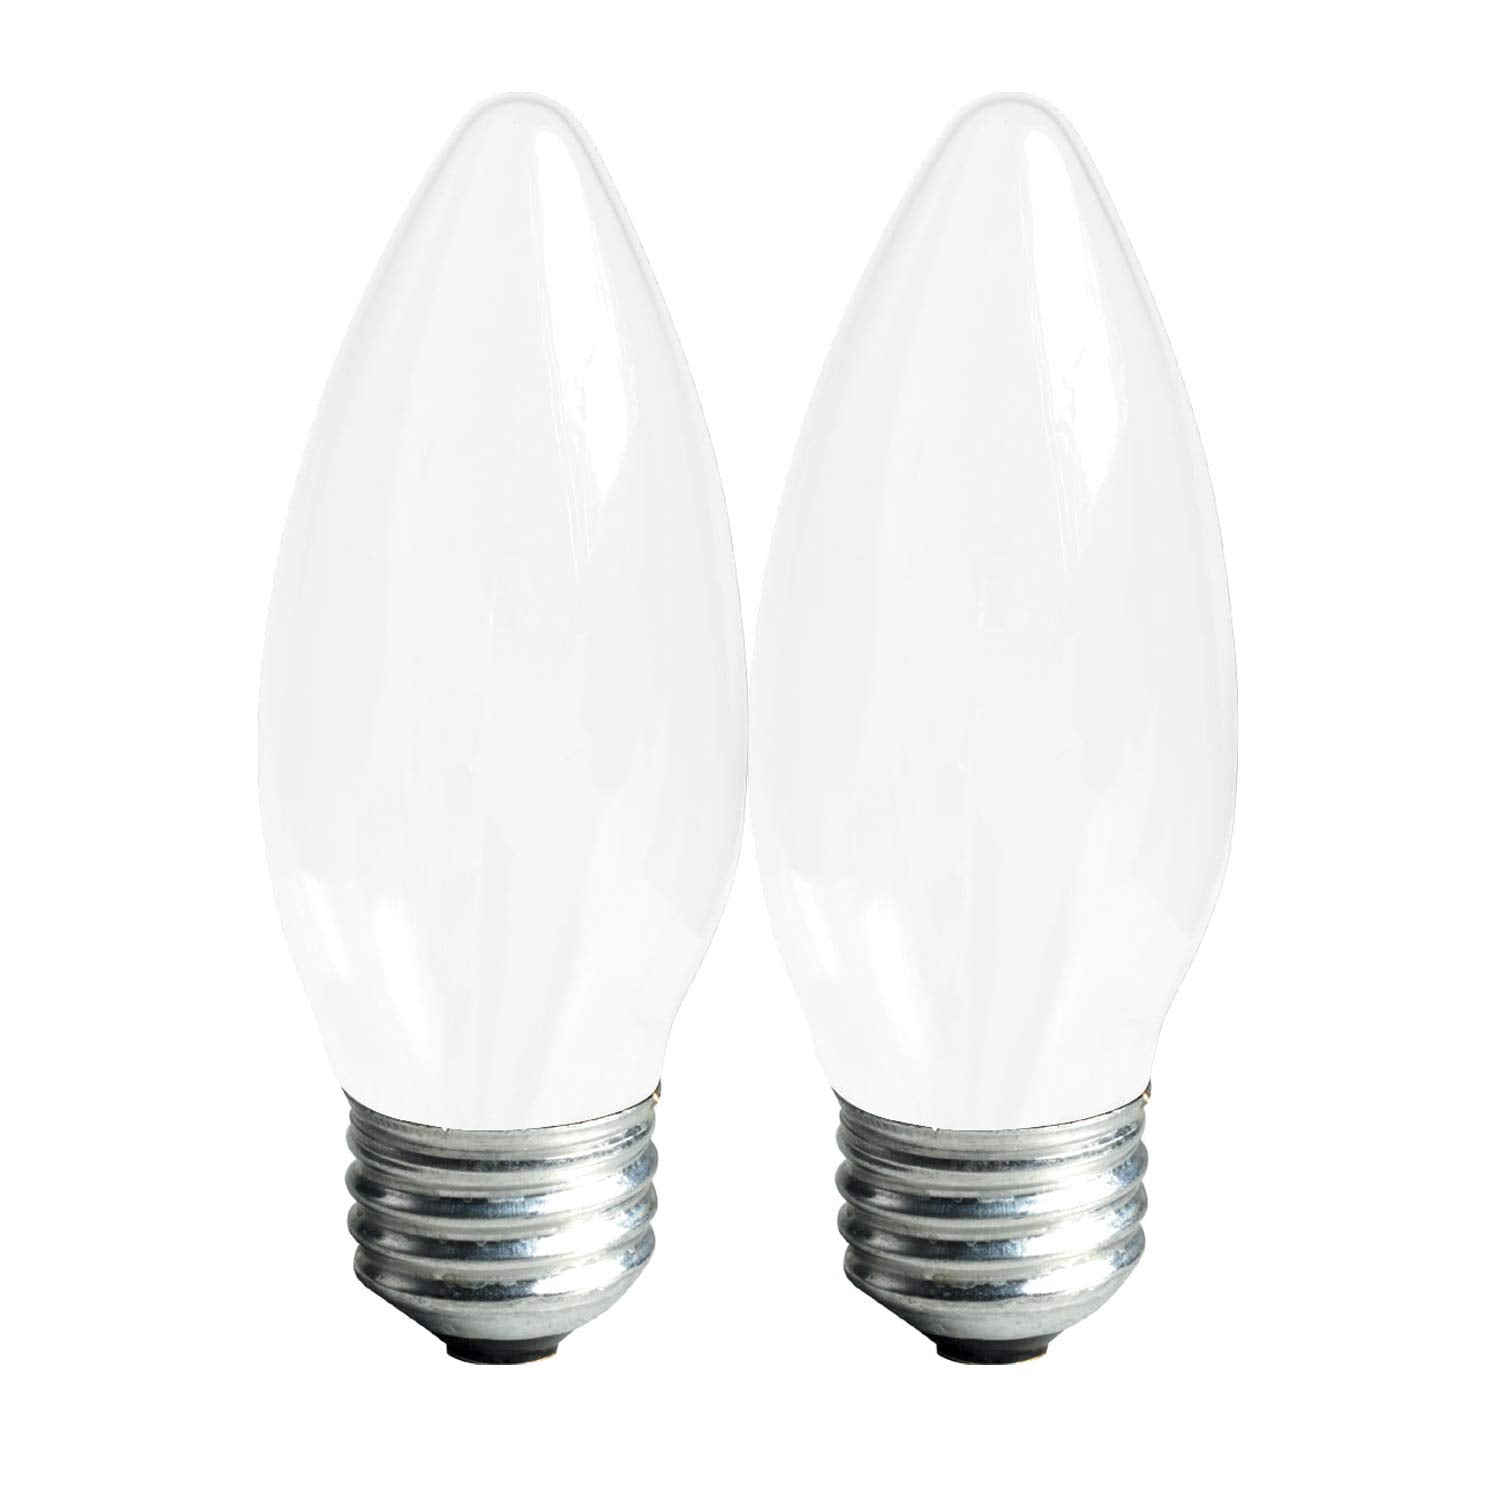 LED 3.5W Clear Decorative LED $5 for 8 Bulbs Brand New  Lighting,GE 2 X 4 Packs 